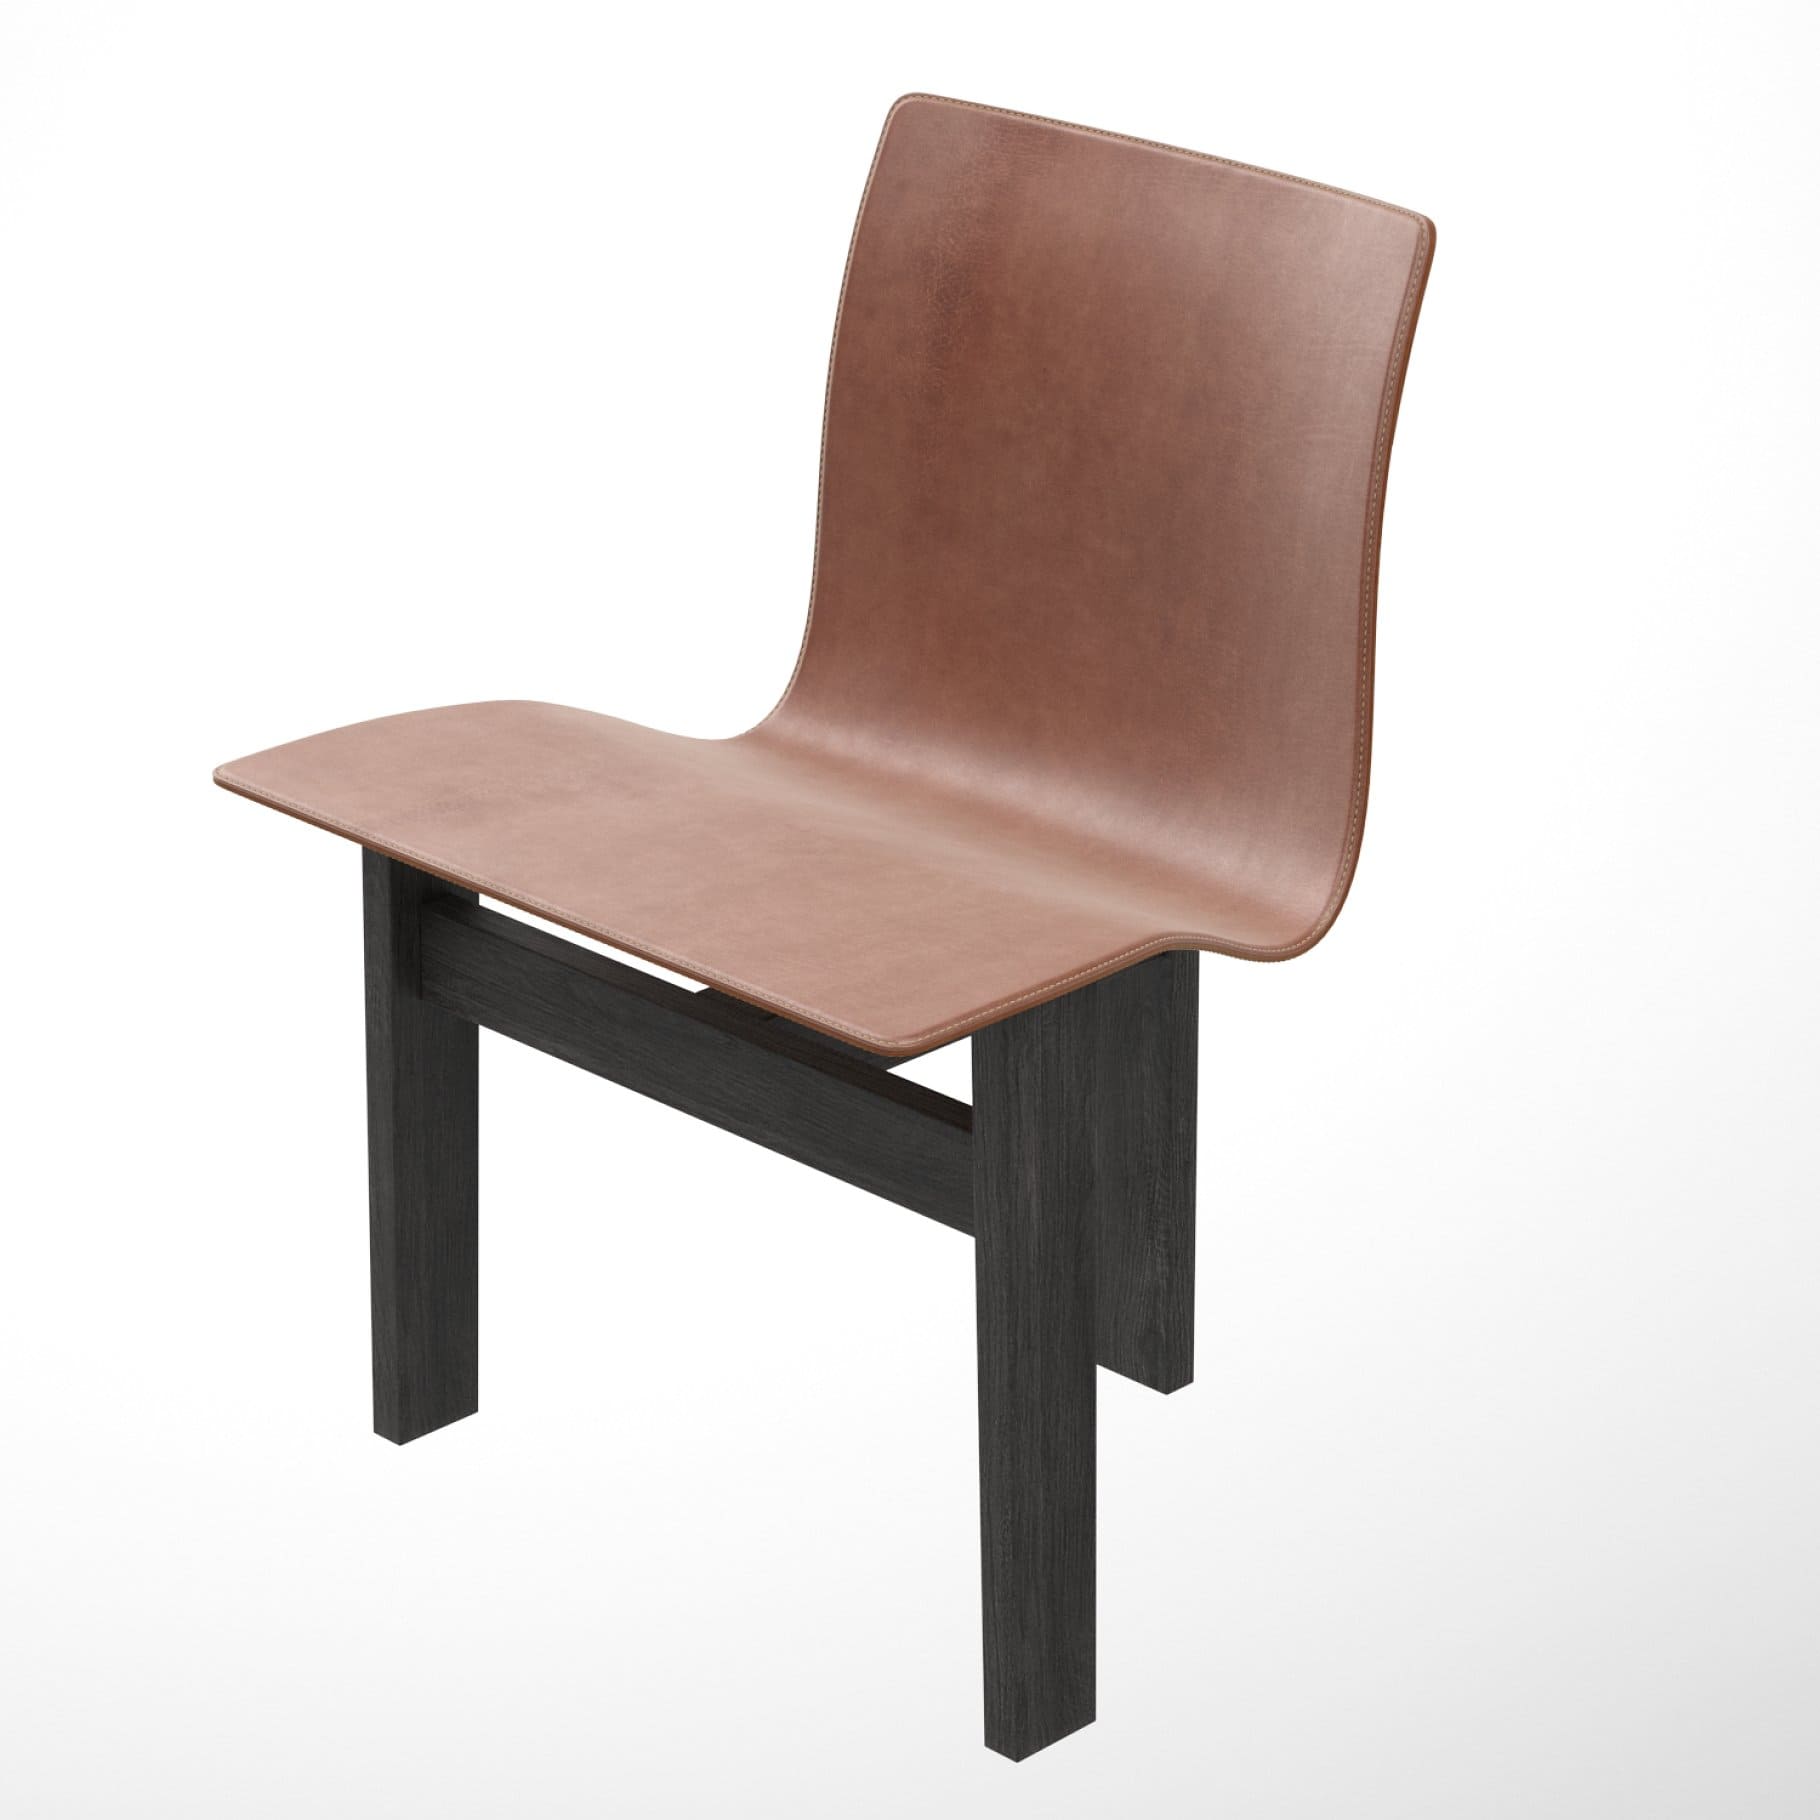 Angled side view of Tre 3 wooden chair with curved back.